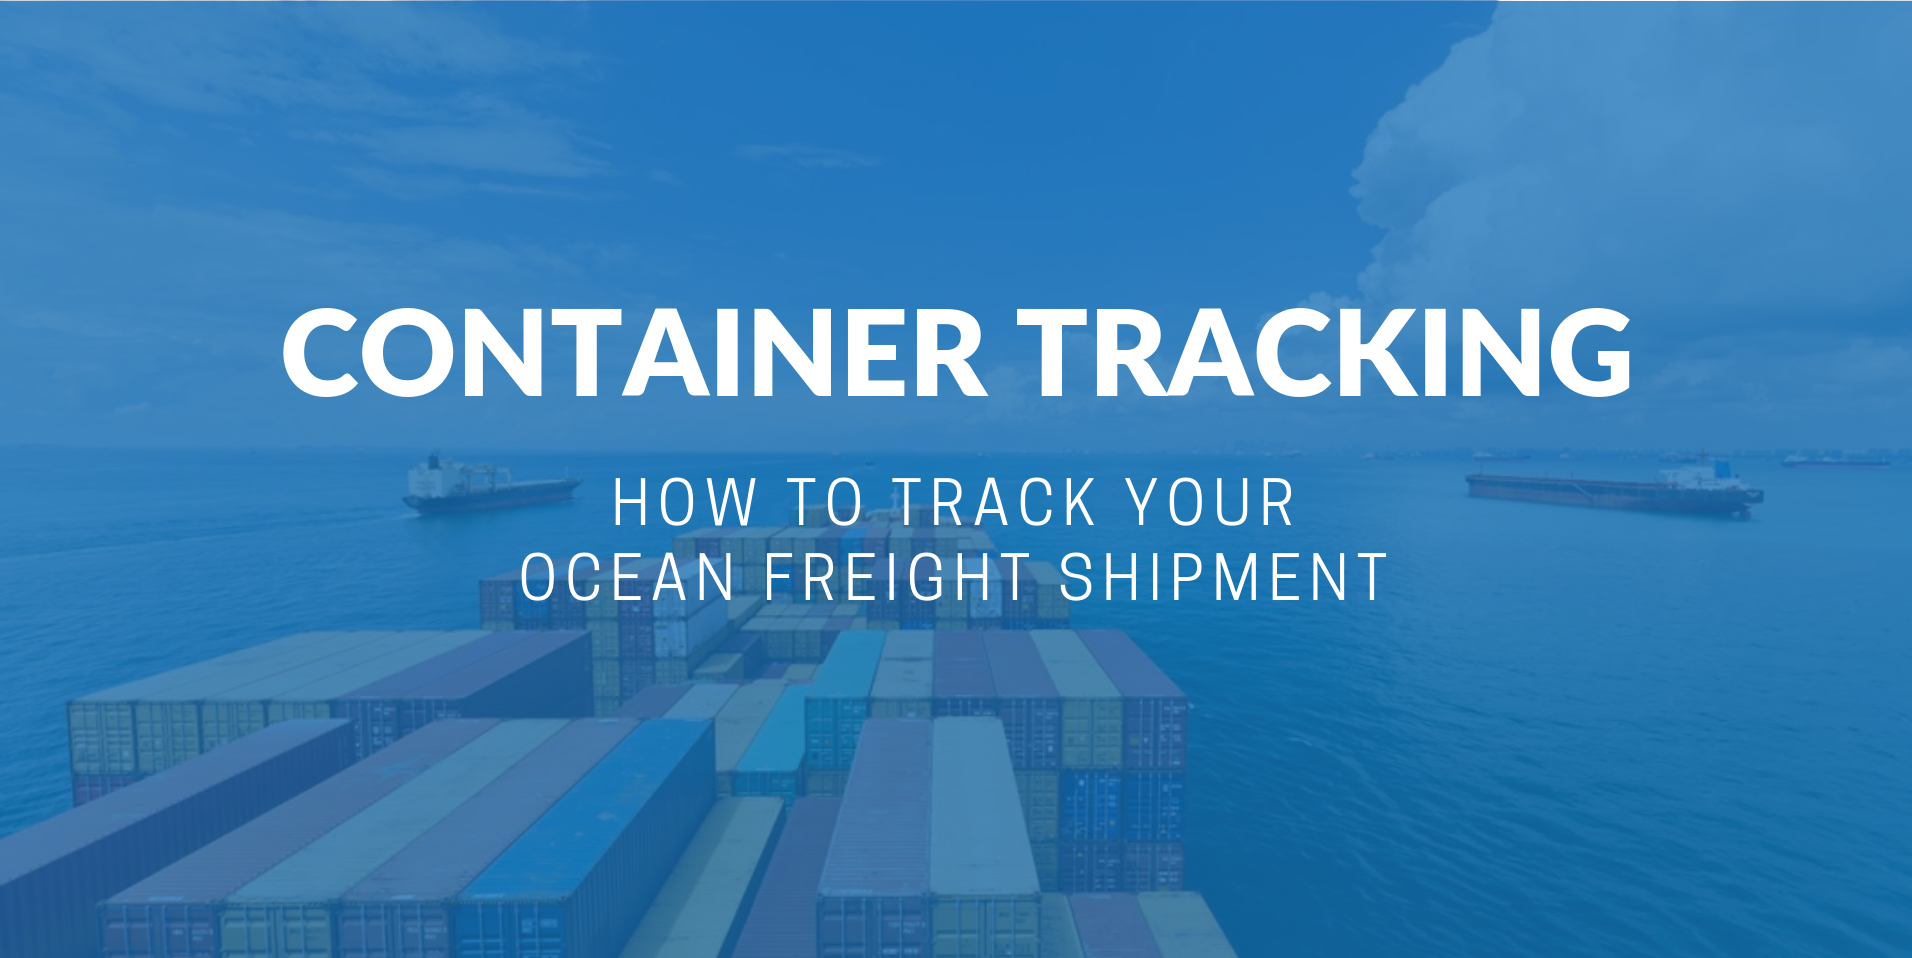 Container tracking - How to track your ocean freight shipment